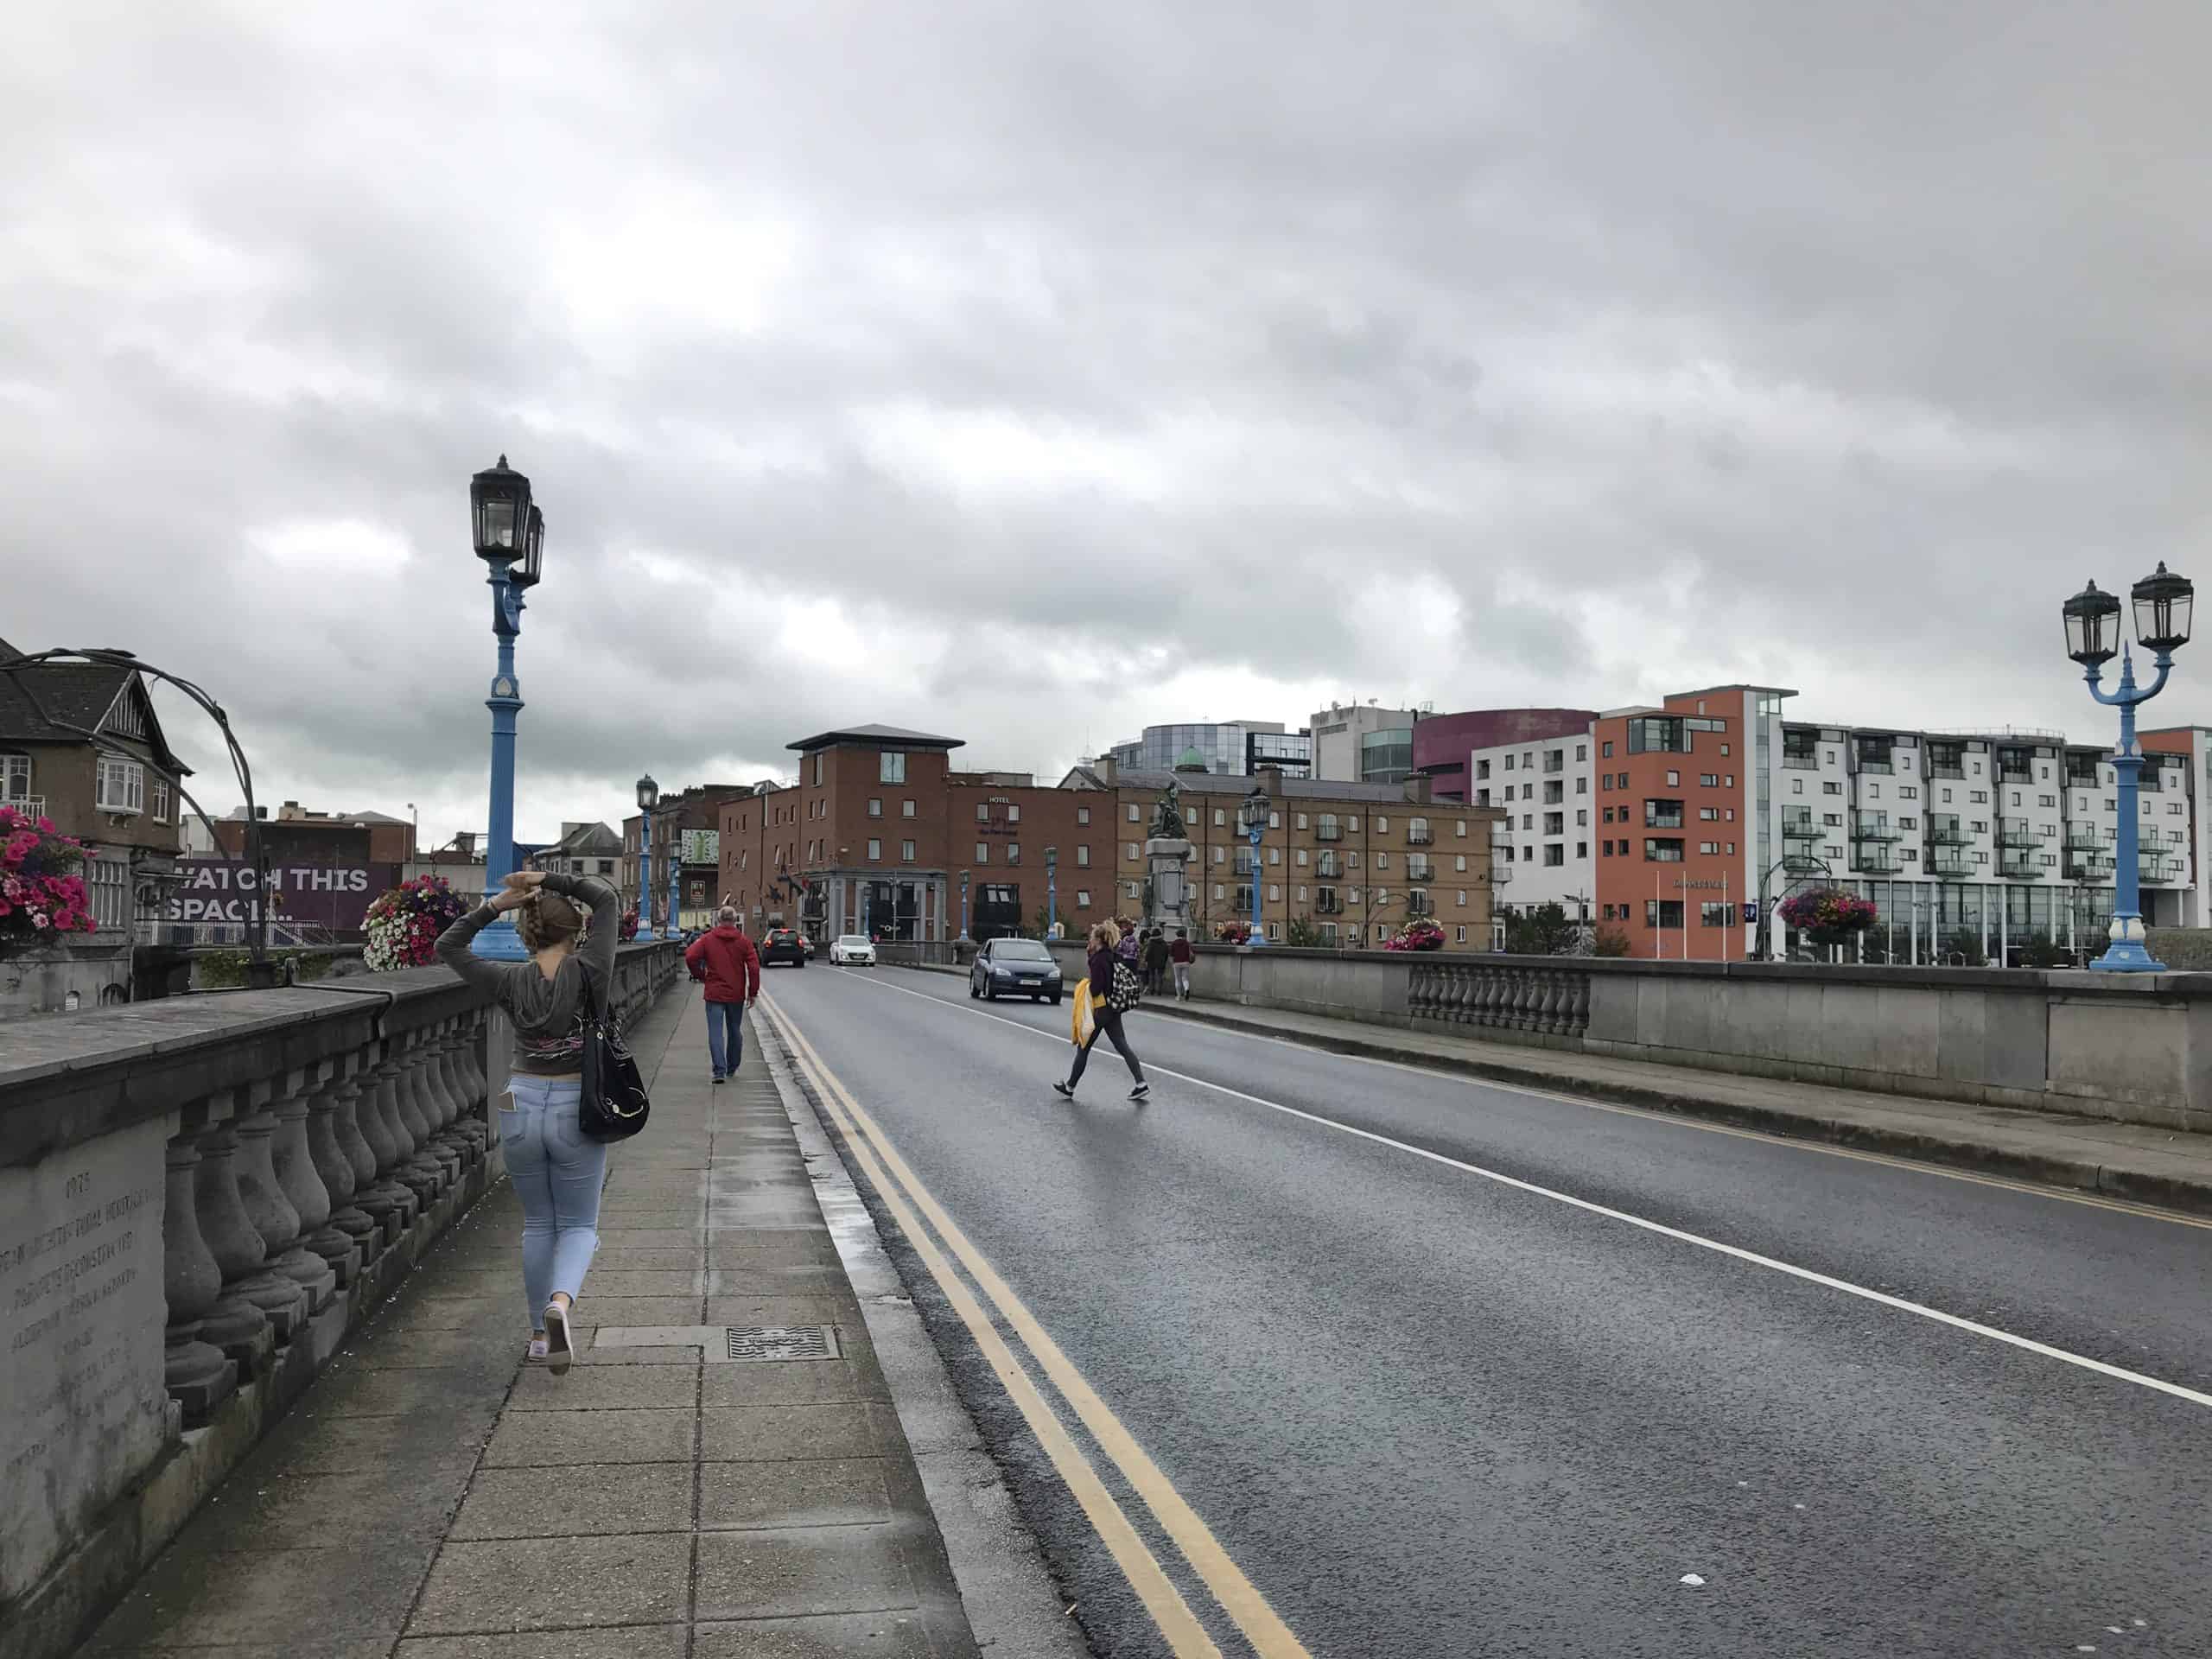 In Limerick, Ireland. A bridge with a road and sideway. A few local people are walking around. Behind the bridge are red, brown, white buildings. A dark cloudy sky.